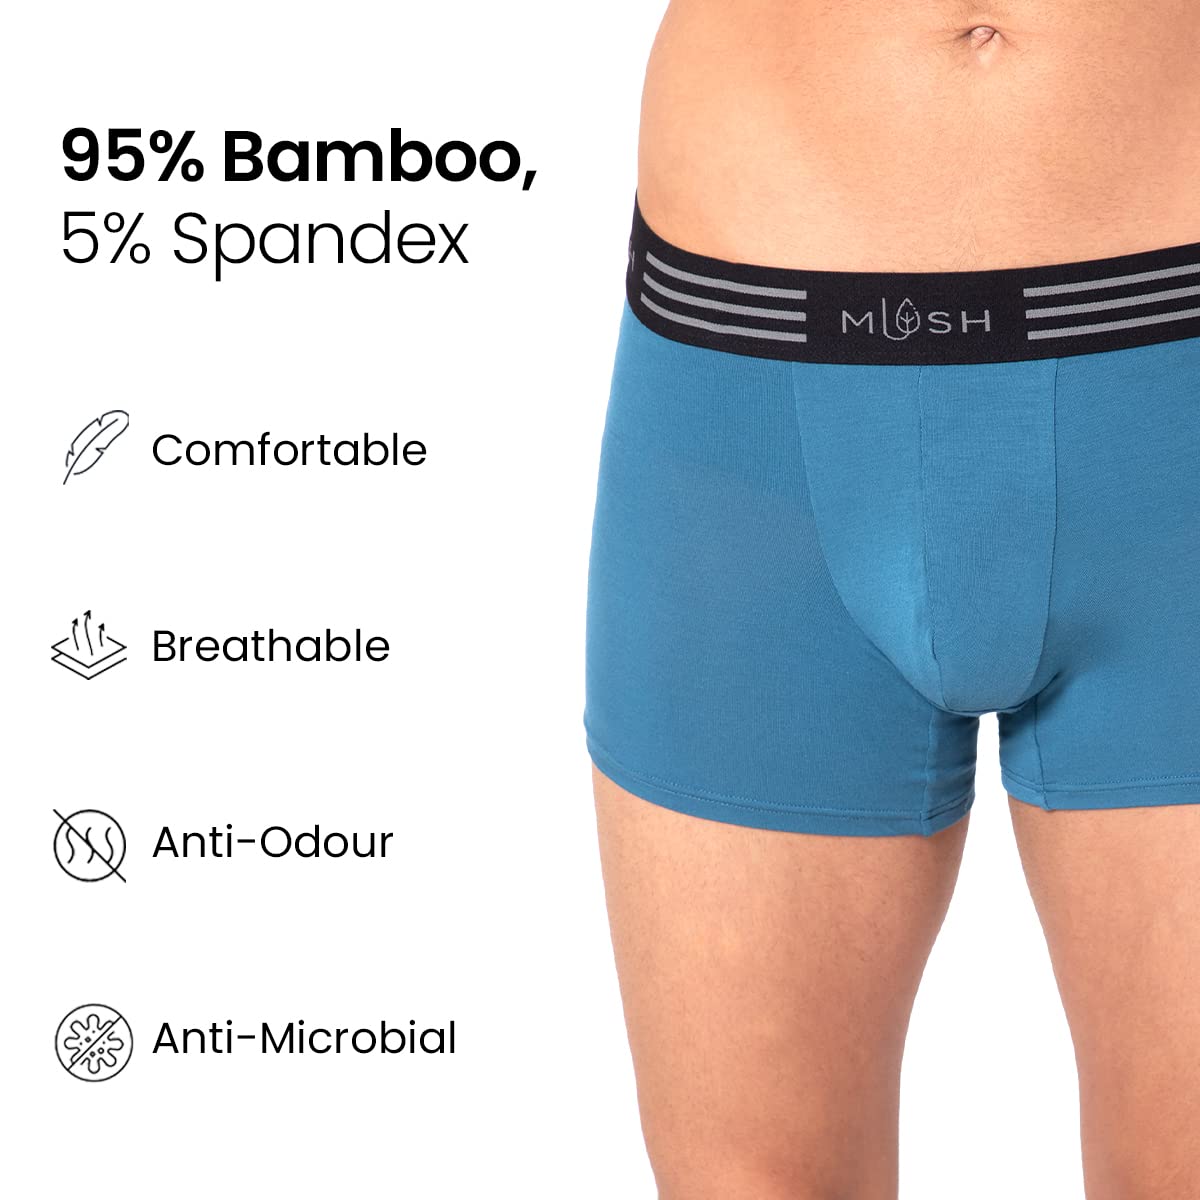 Mush Ultra Soft, Breathable, Feather Light Men's Bamboo Trunk || Naturally Anti-Odor and Anti-Microbial Bamboo Innerwear Pack of 2 (M, Blue and White)